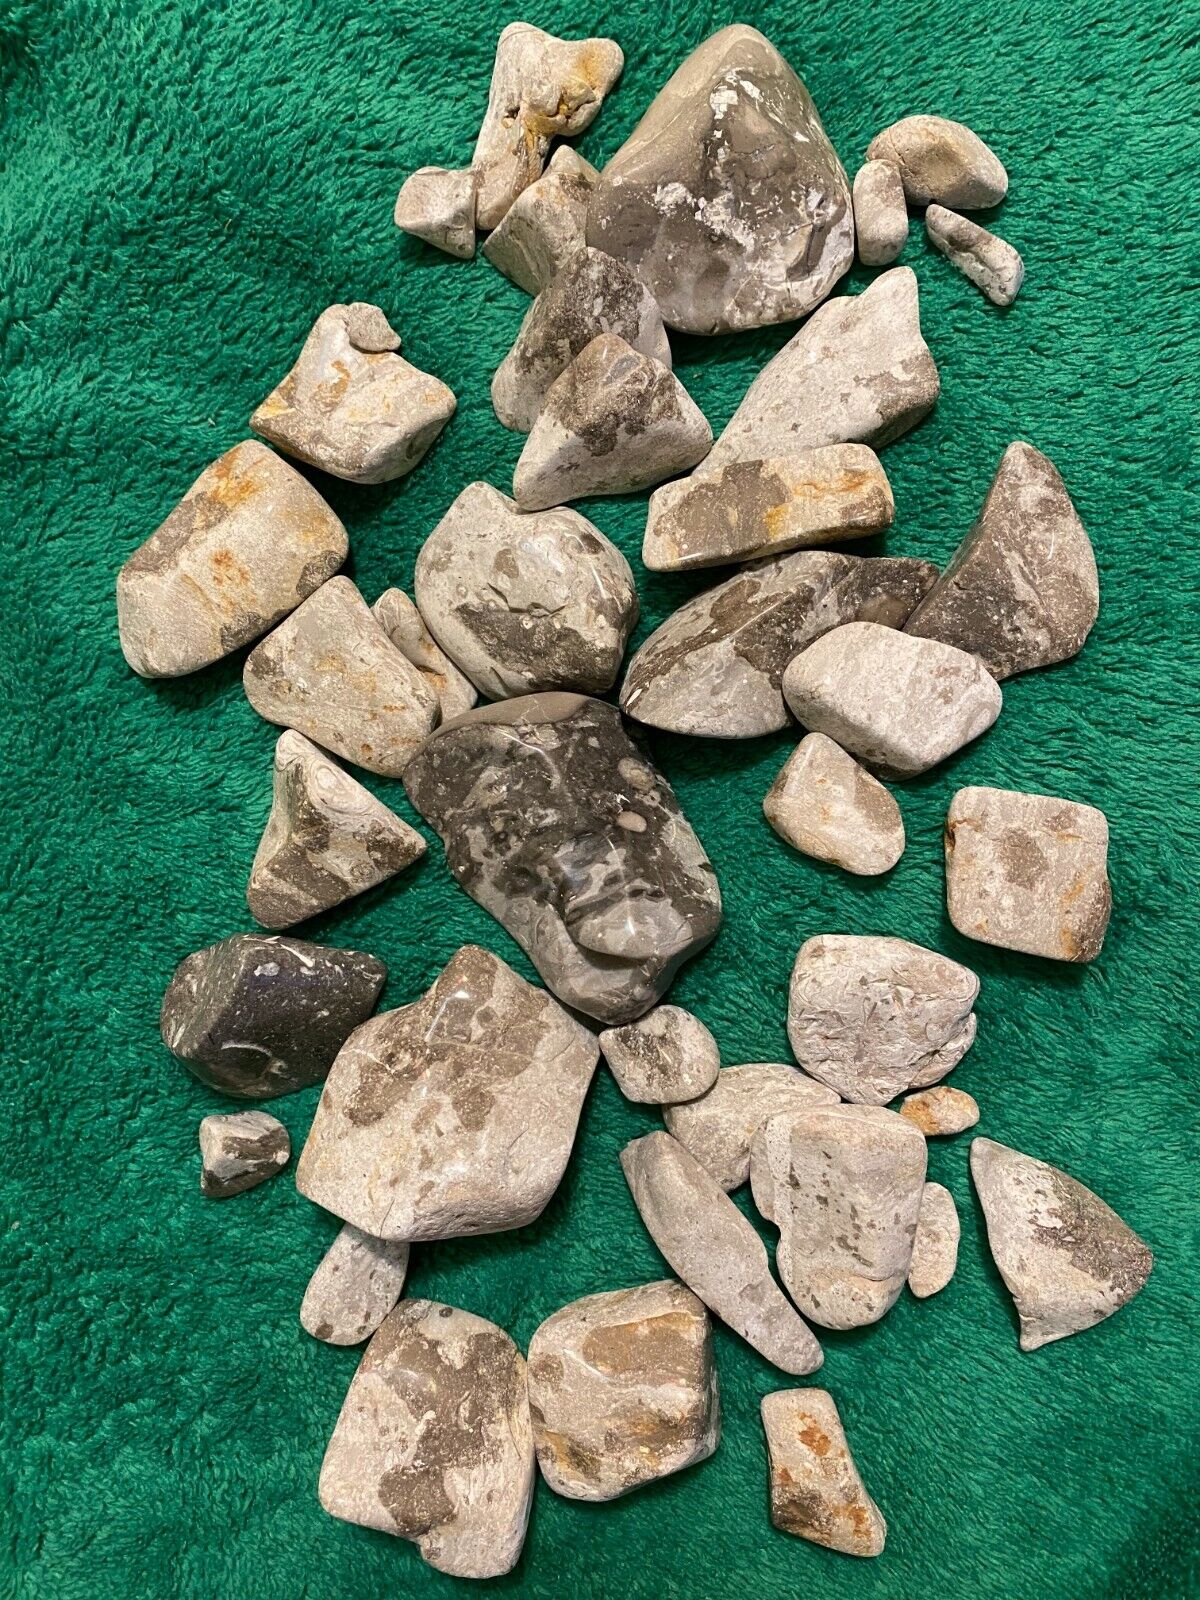 Tumbled Porcelaineous Dolostone (with Fossils)